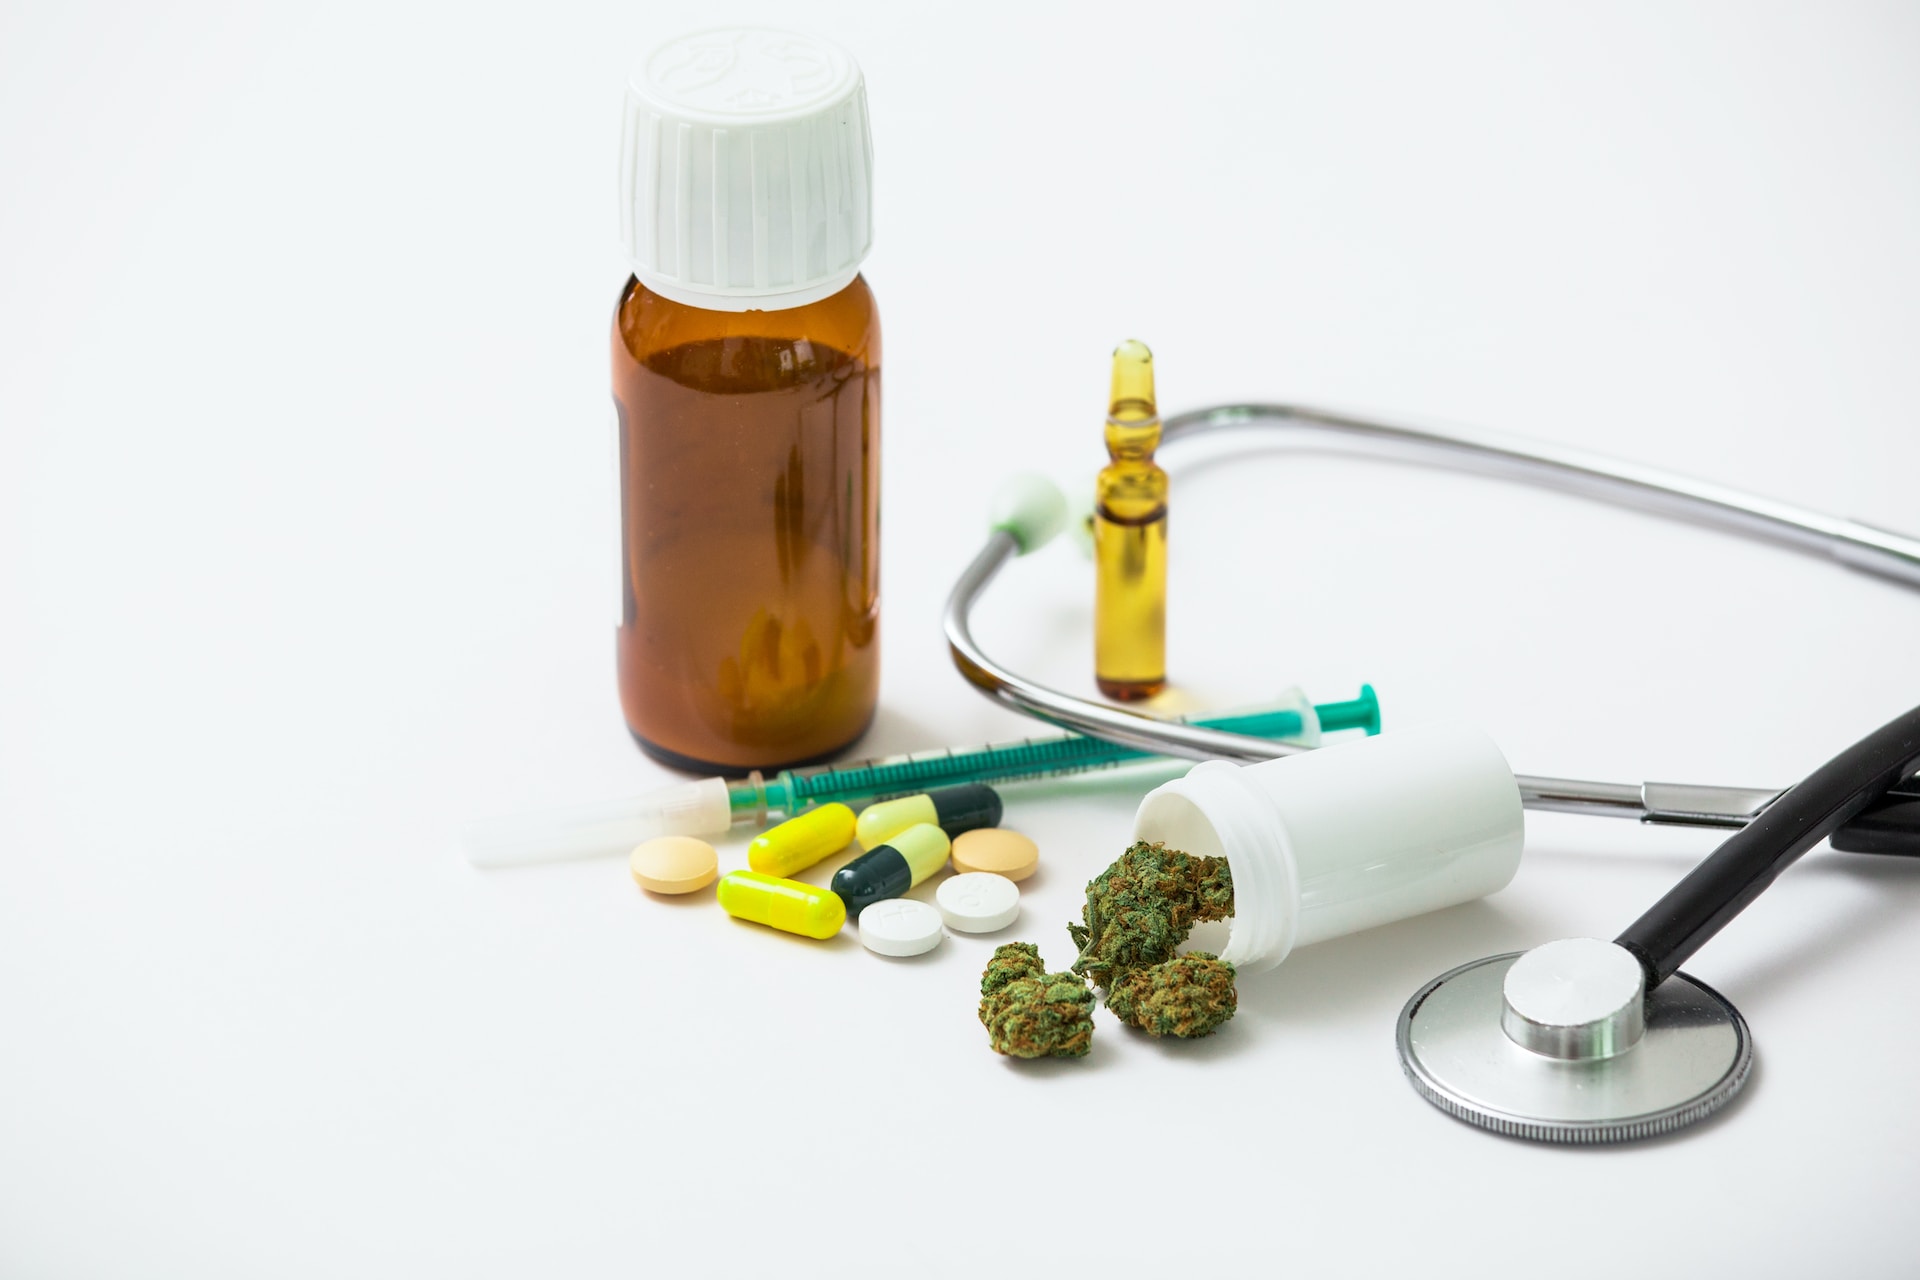 What to Expect When Applying for a Medical Marijuana Card